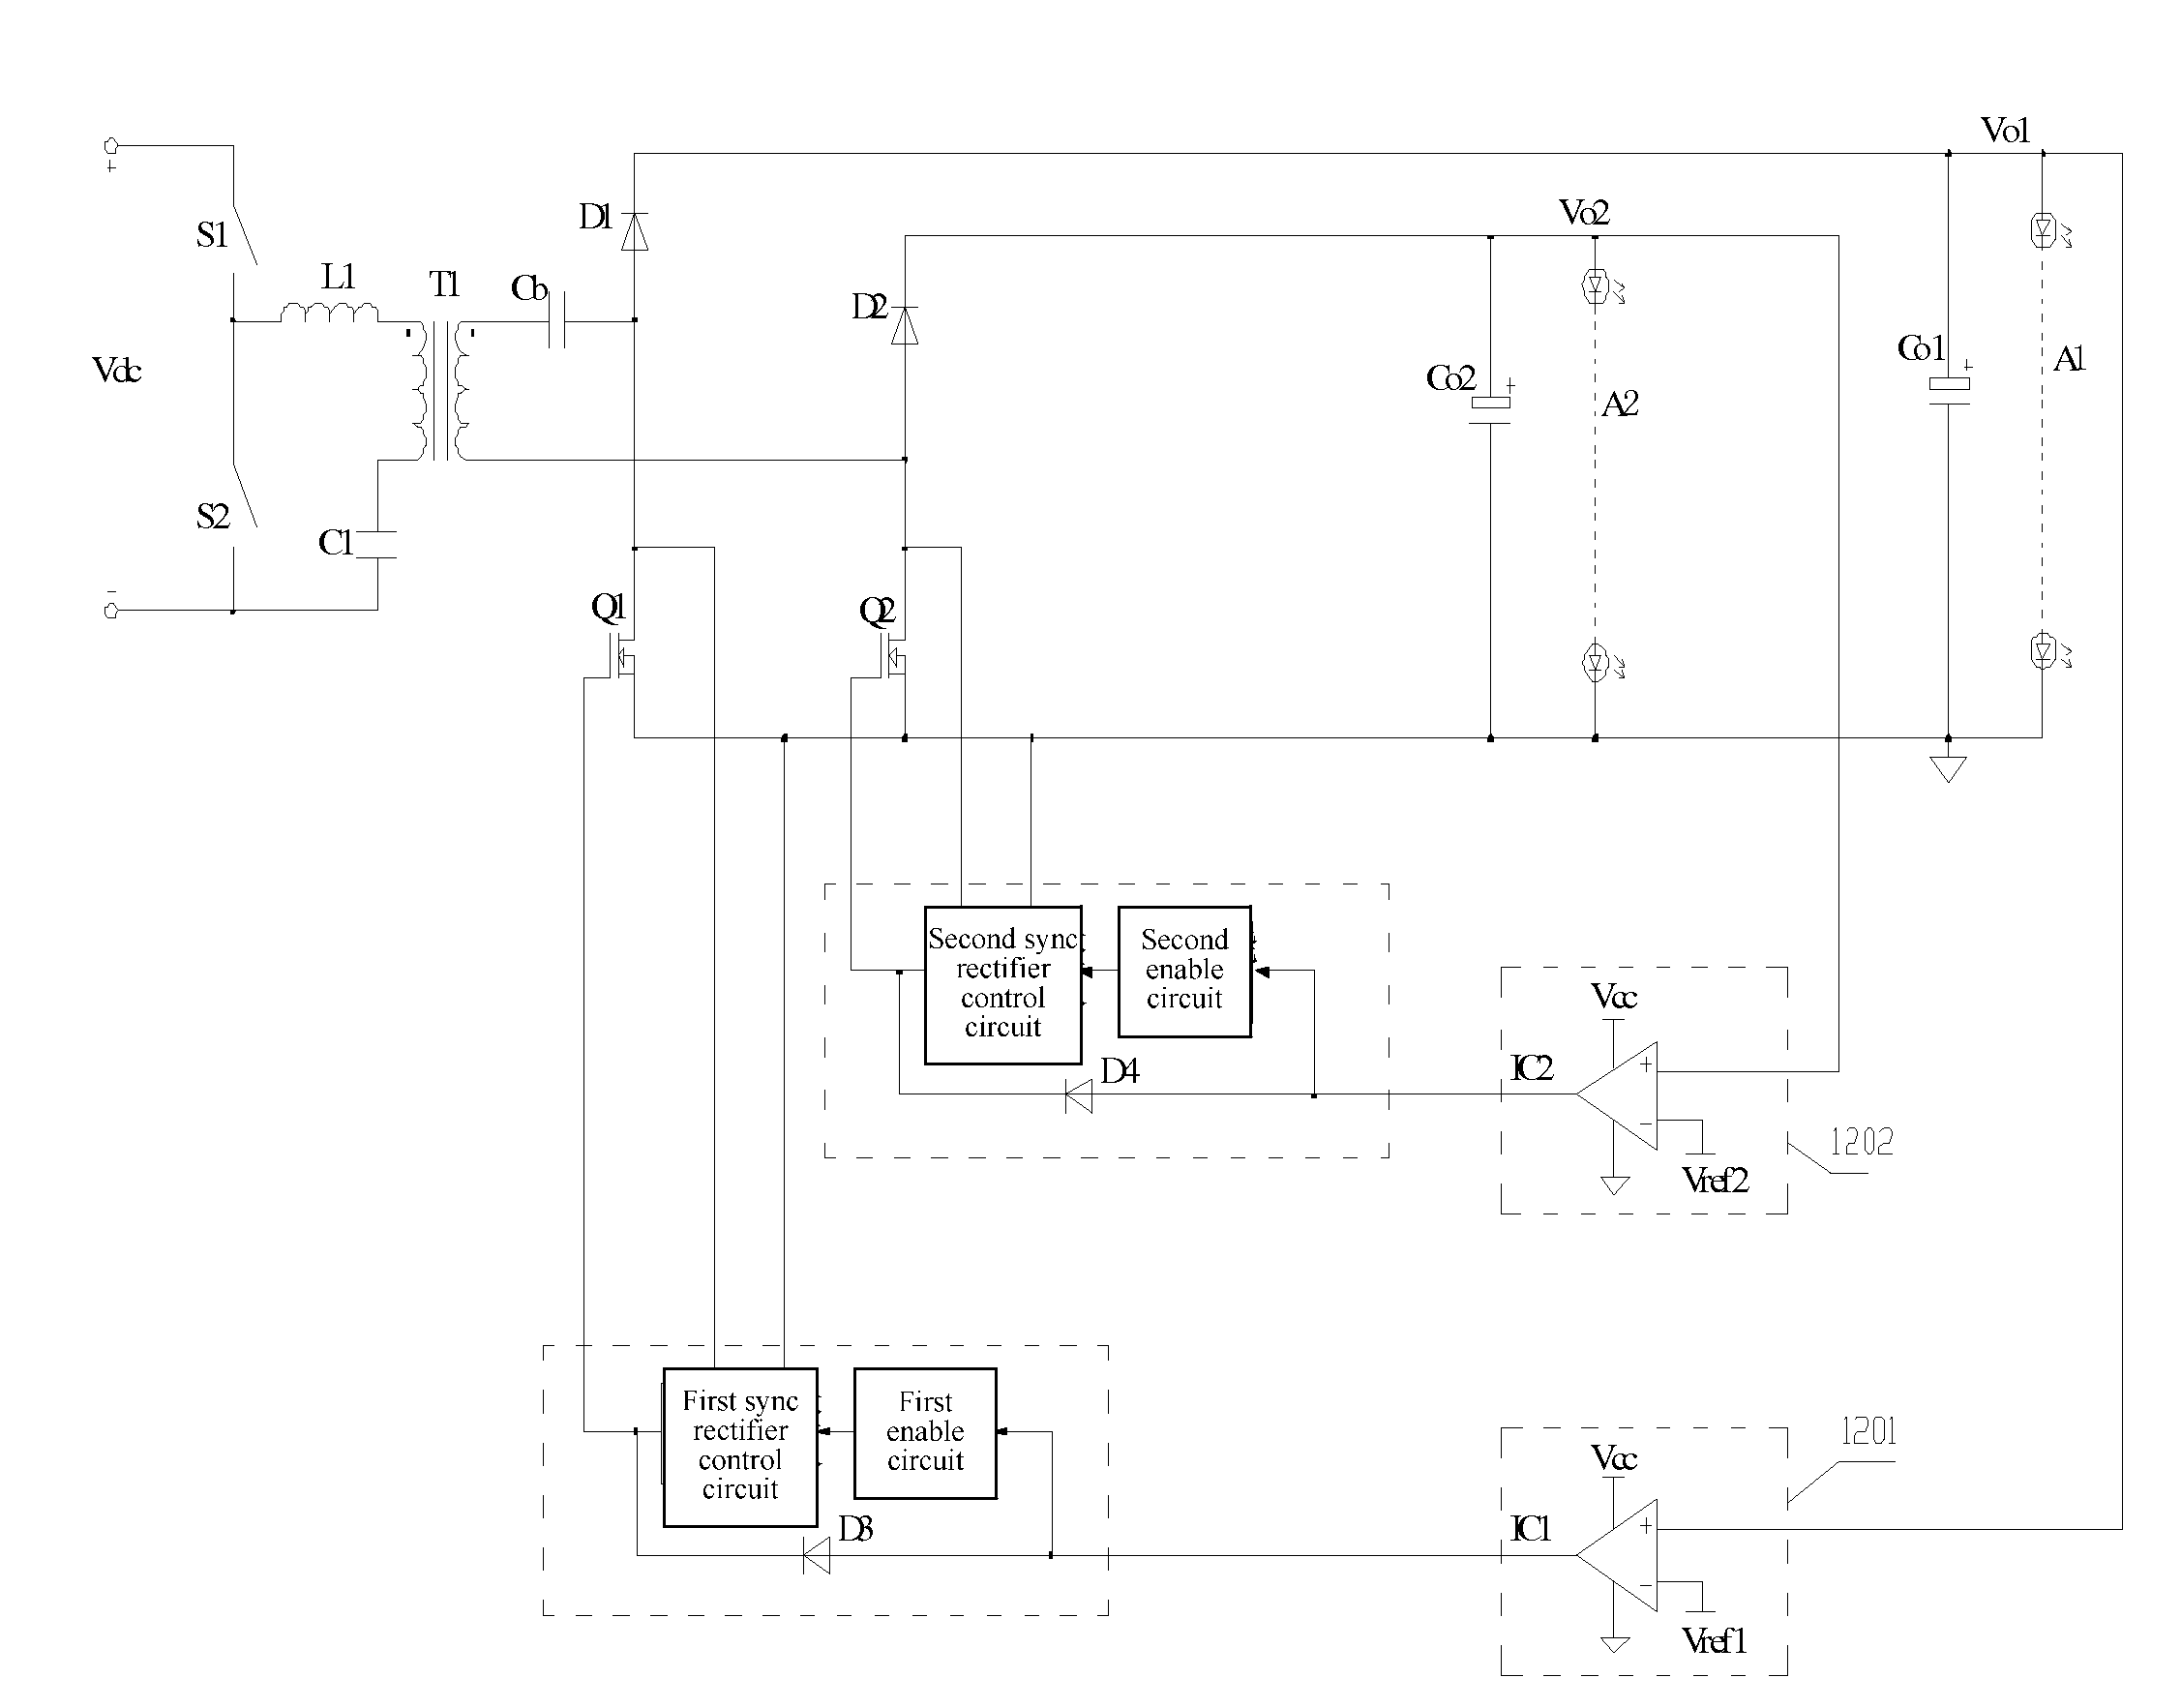 Power supply circuit for multi-path light-emitting diode (LED) loads